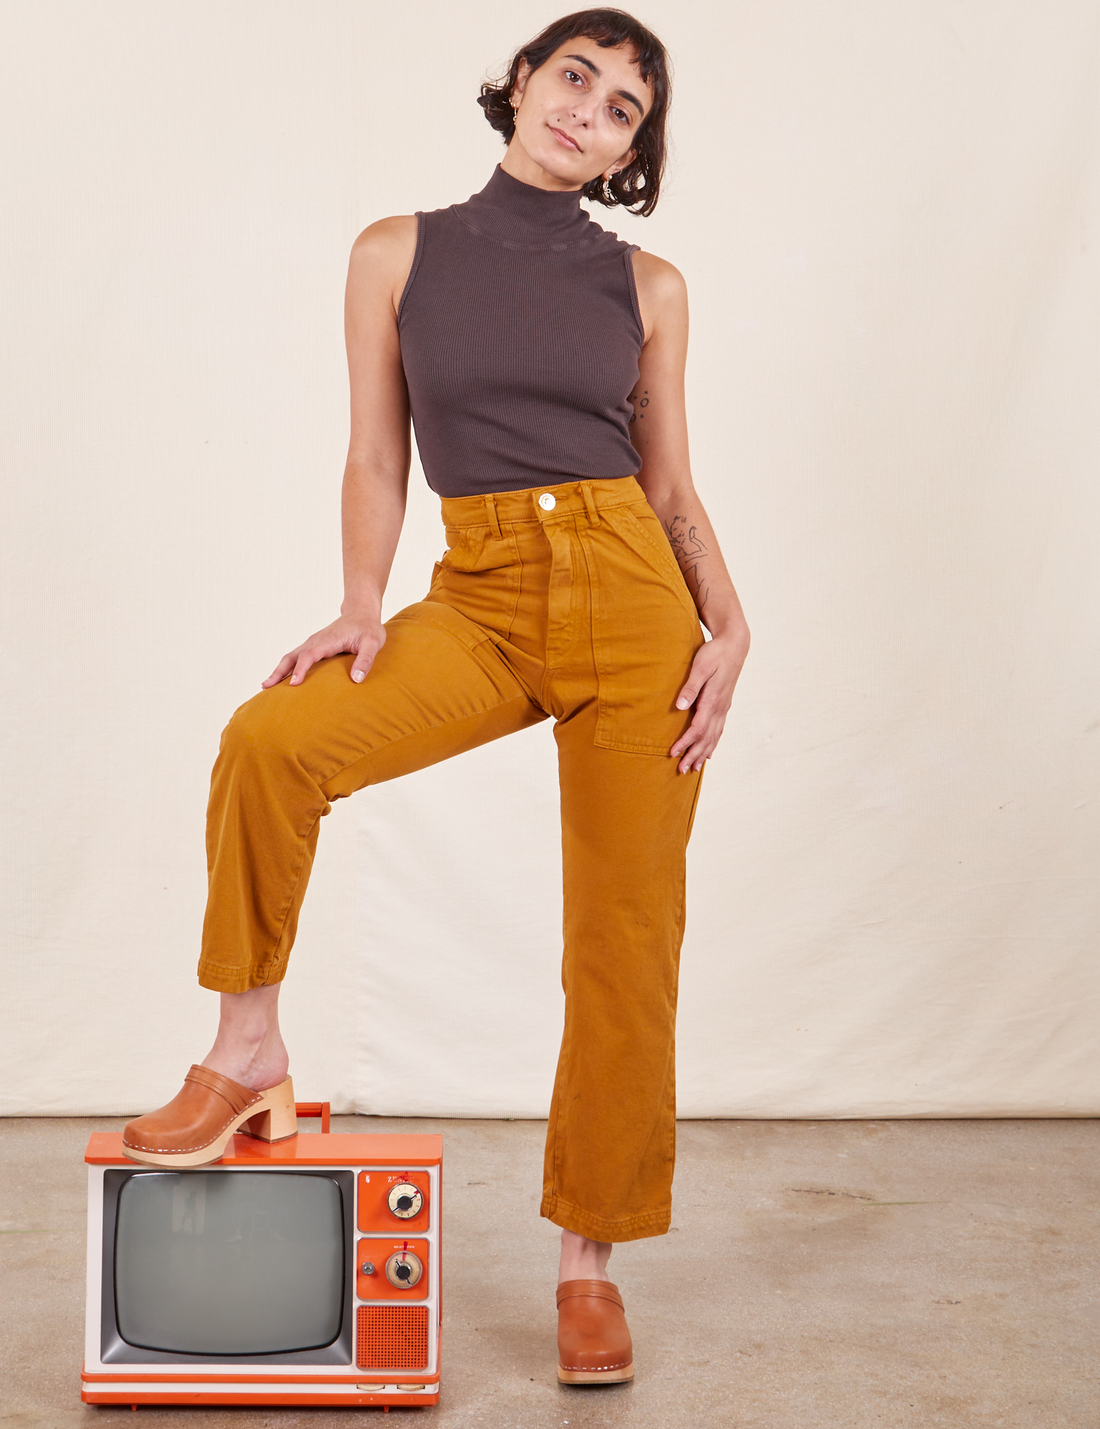 Work Pants in Spicy Mustard on Soraya wearing espresso brown Sleeveless Turtleneck. She has one foot on a small orange vintage tv with the other foot on the ground.